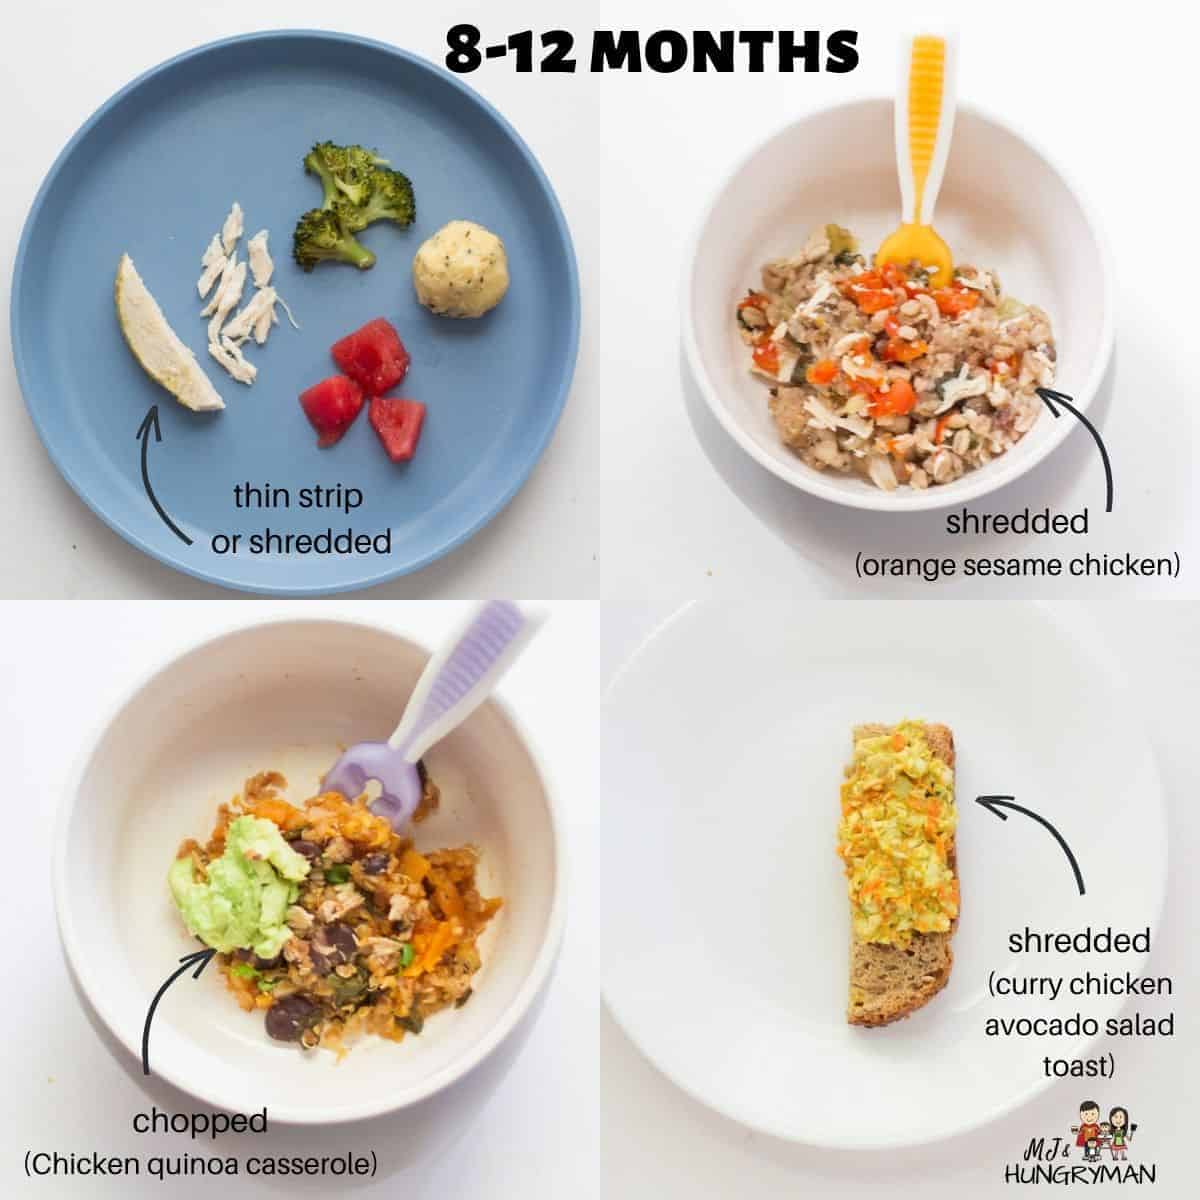 a four image collage showing how to serve to 8-12 month olds - thin strip or shredded, chopped and added to casserole, spread onto toast.